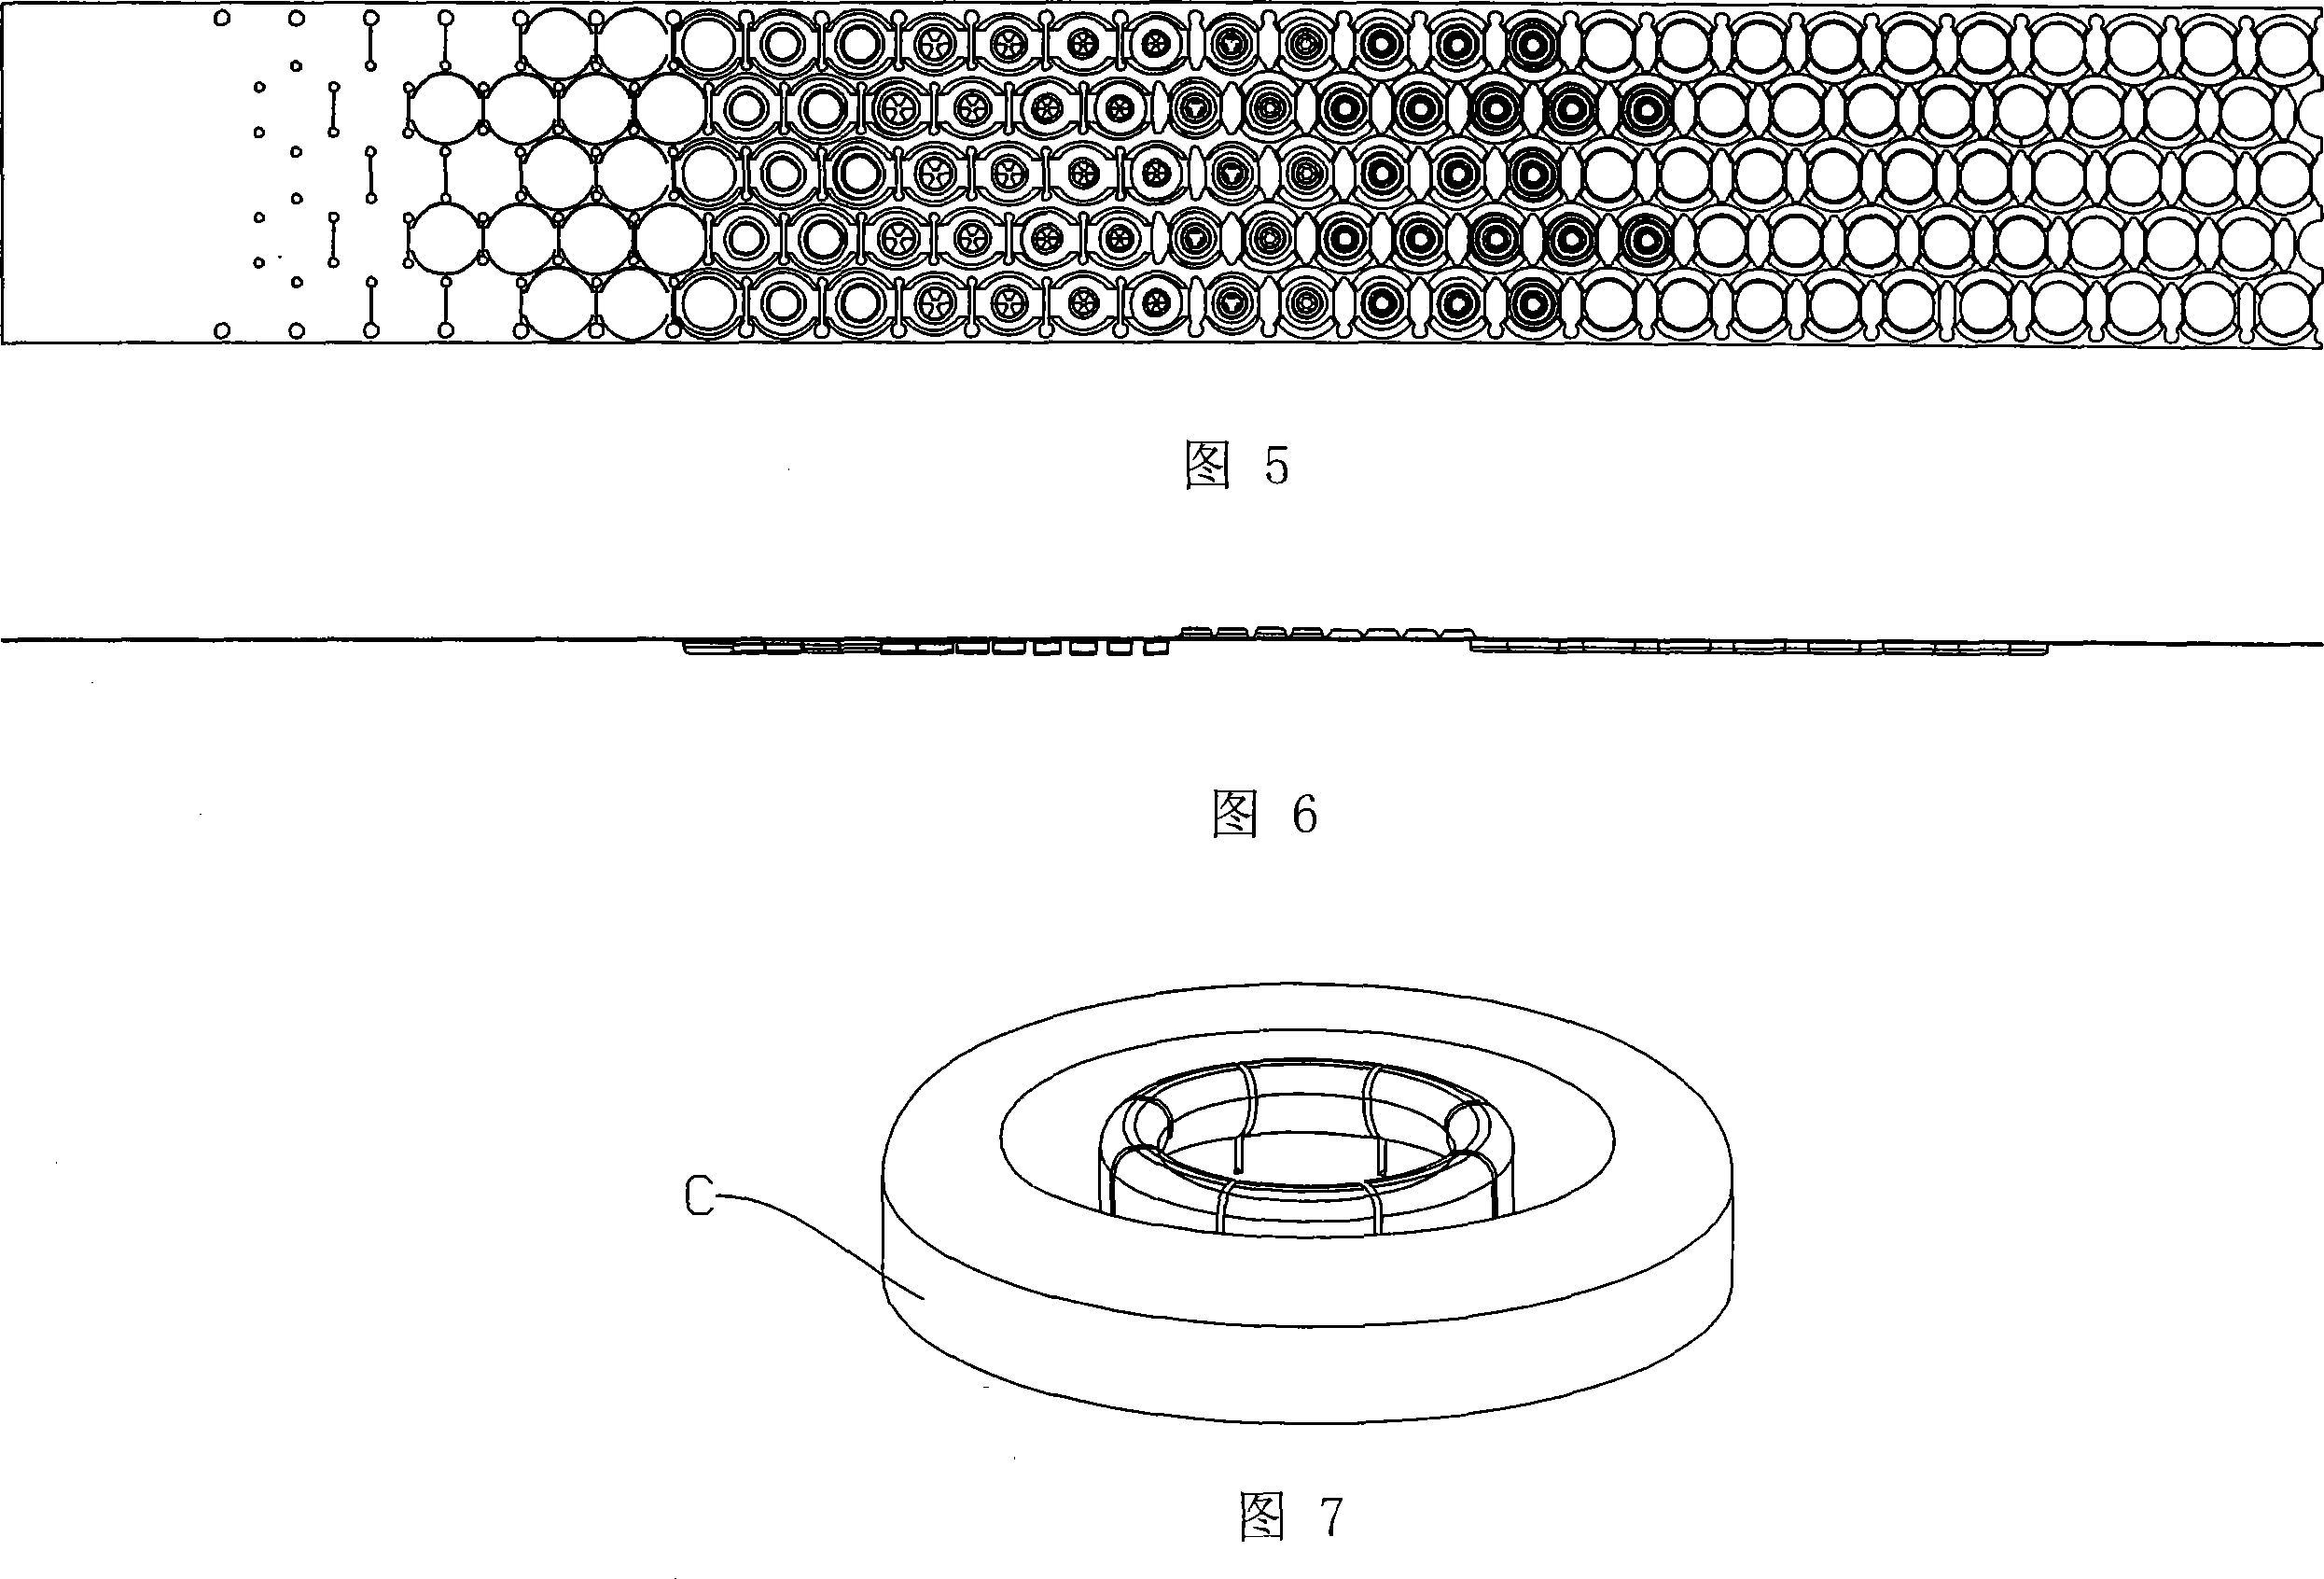 Technique method using metal sheet material to draft connecting component like buckles